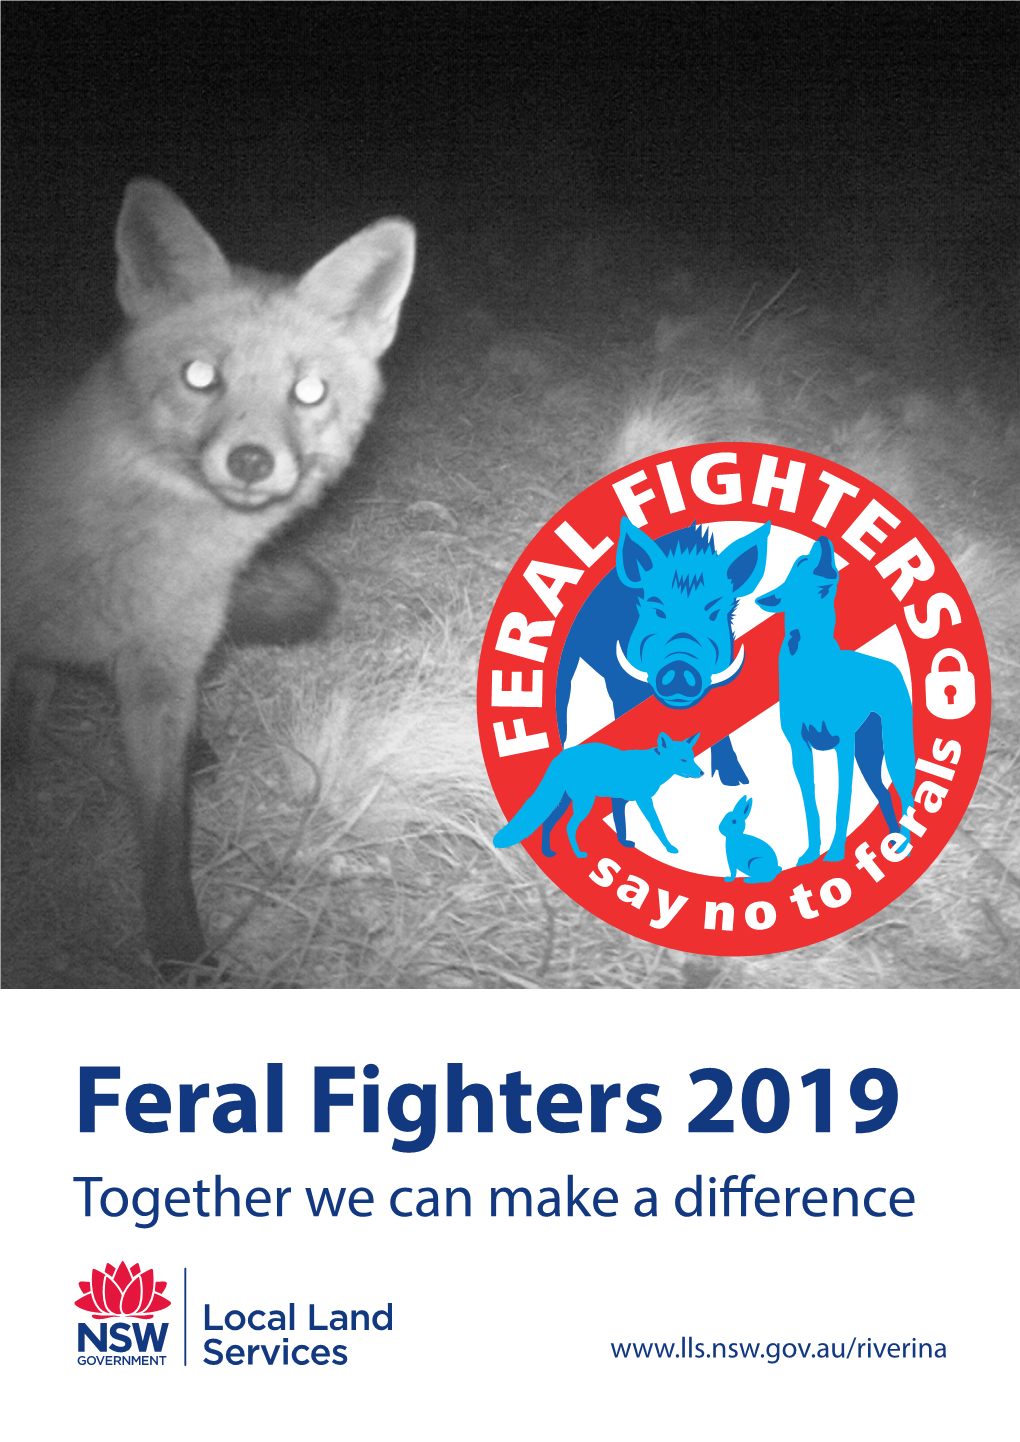 Feral Fighters 2019 Together We Can Make a Difference